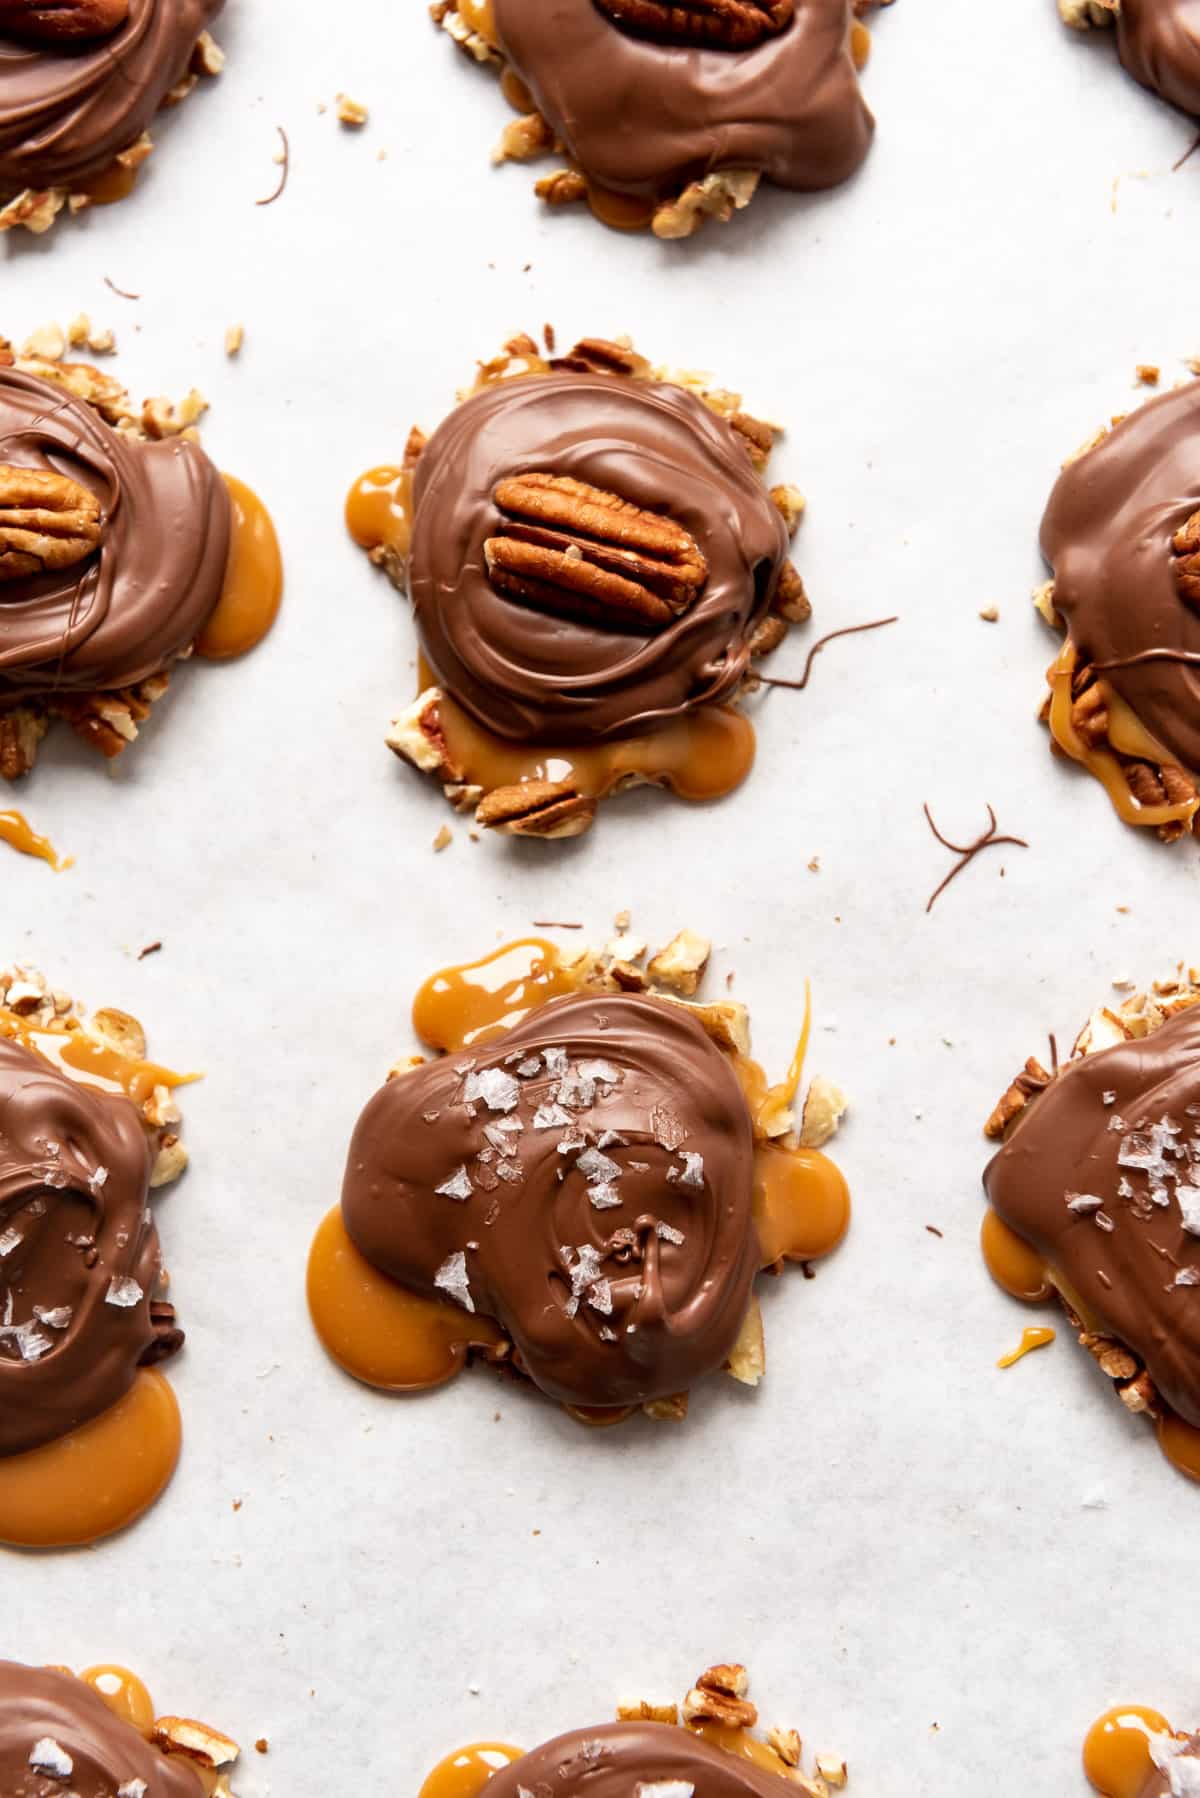 Caramel covered in chocolate over chopped toasted pecans.